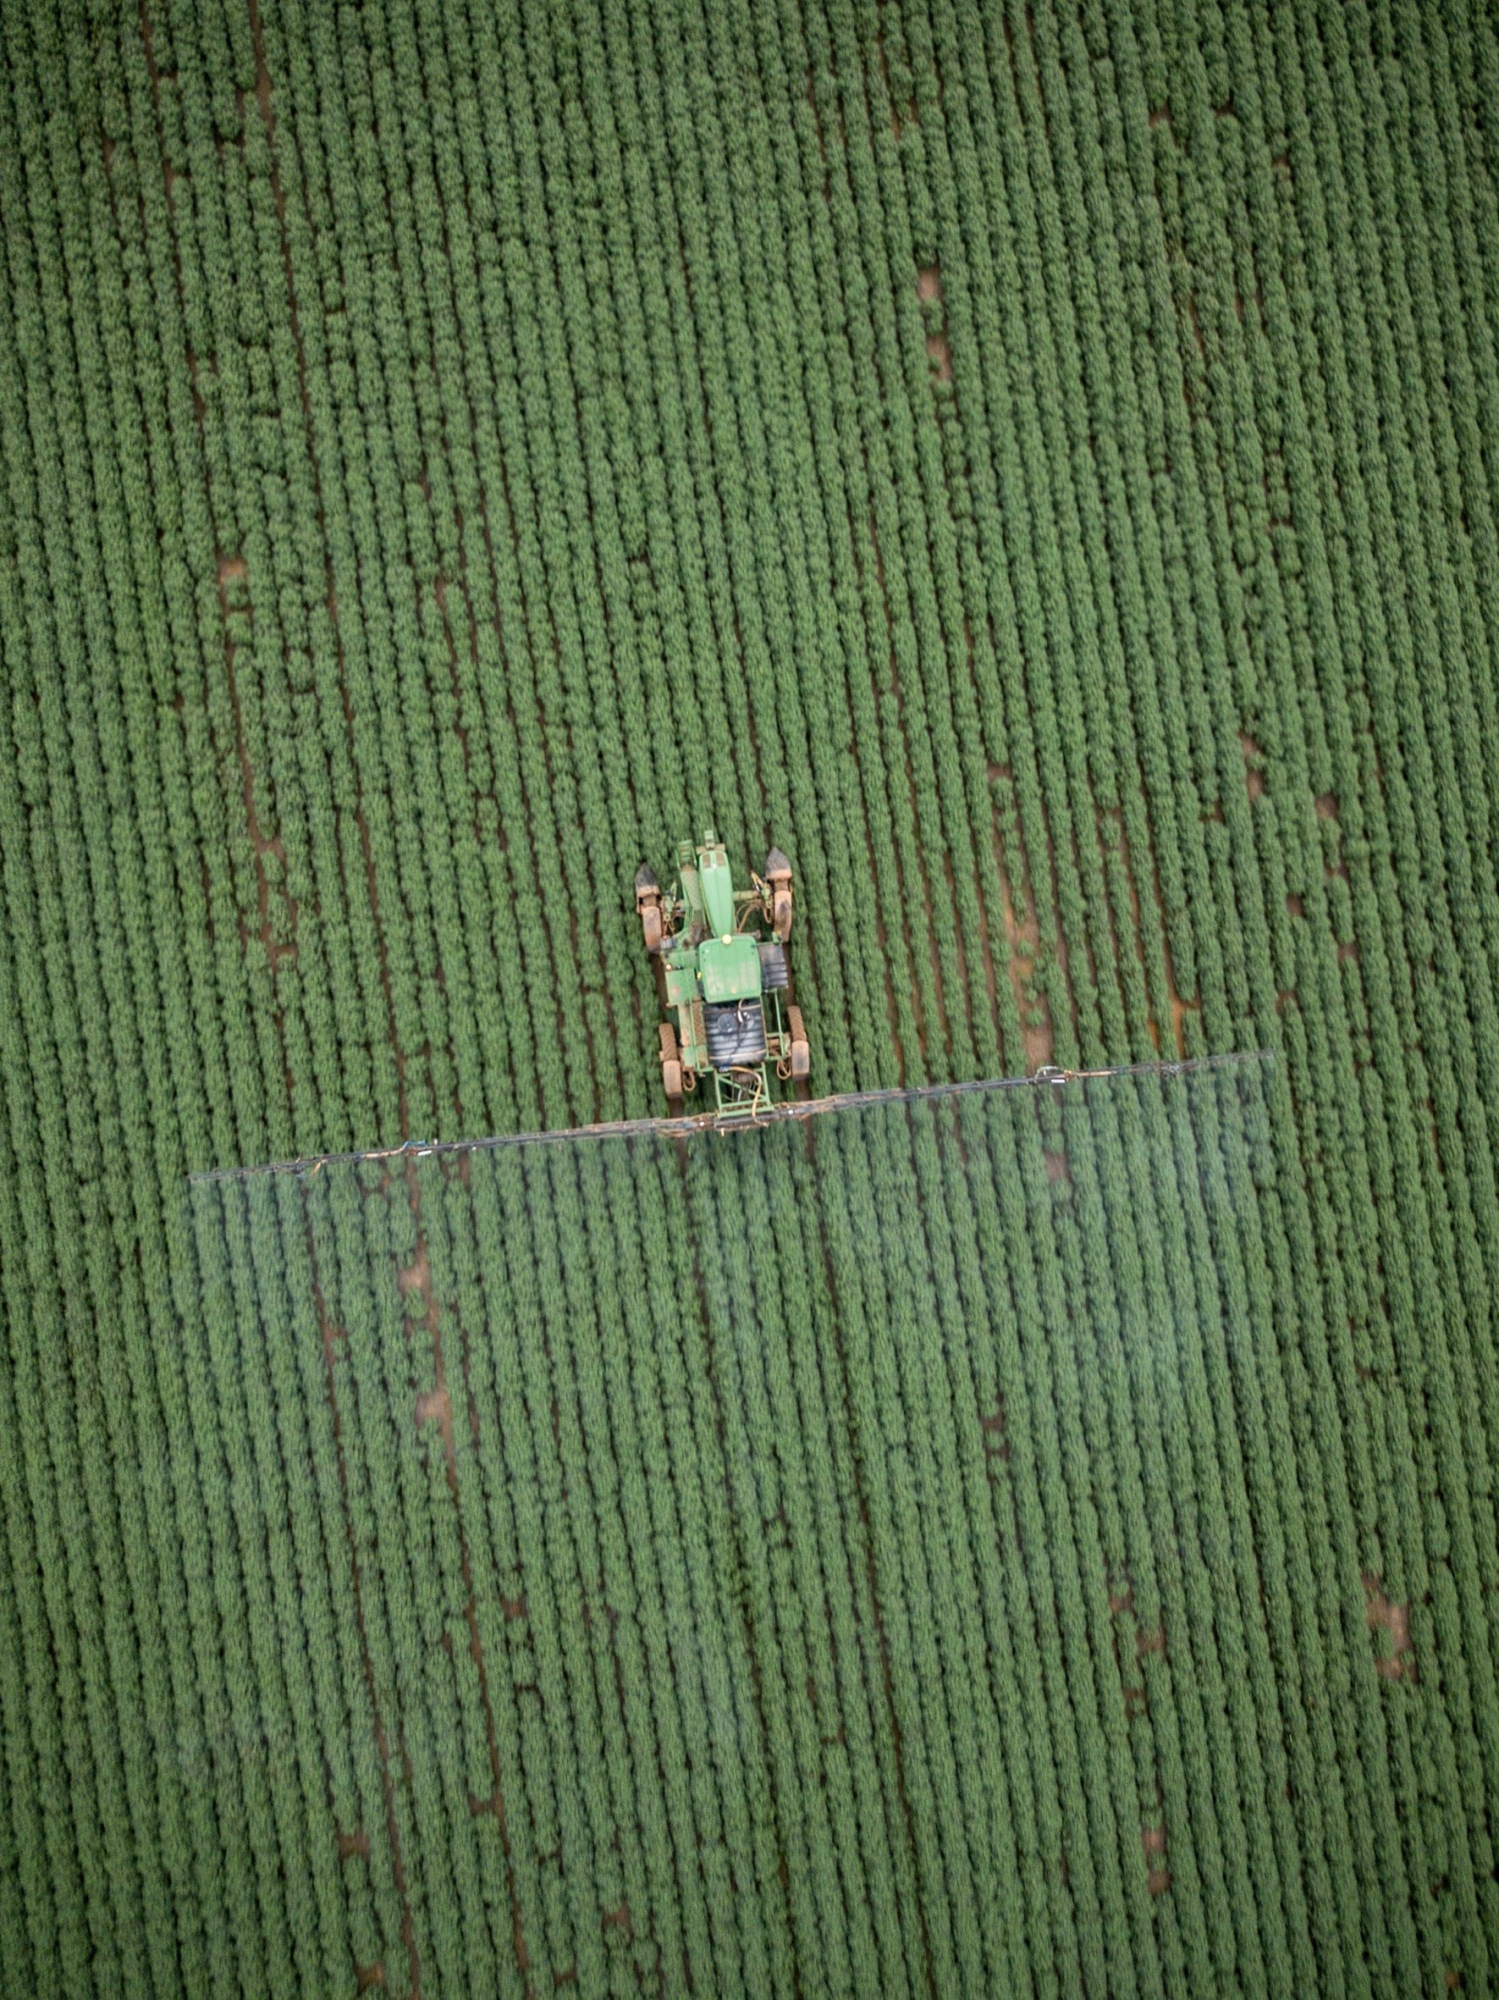 A tractor applying herbicide on a cotton plantation in Sinop, Mato Grosso, Brazil. March 19th, 2018.